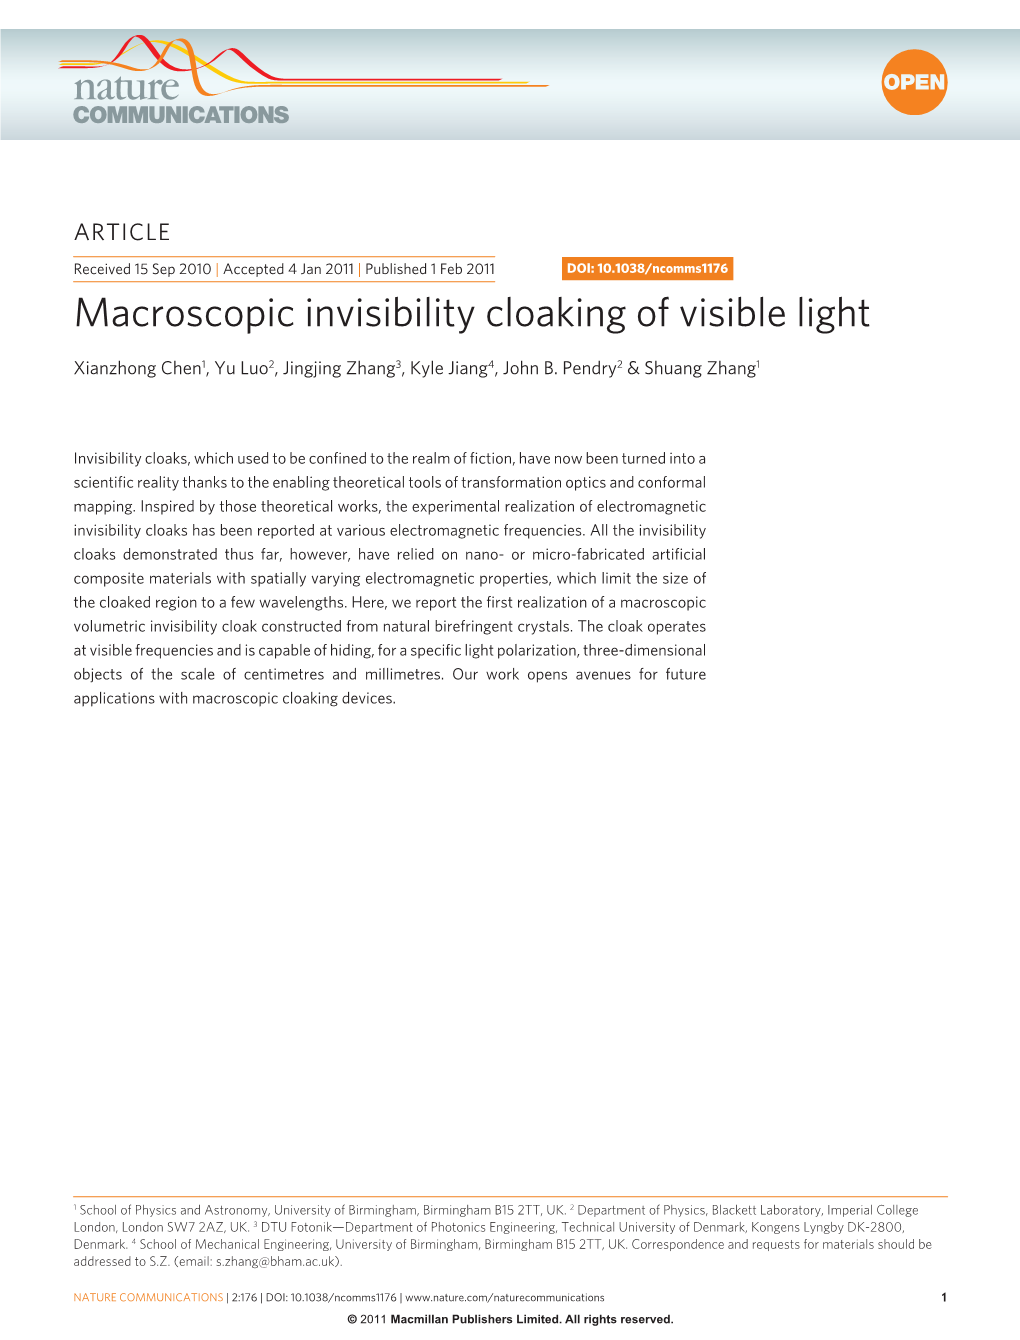 Macroscopic Invisibility Cloaking of Visible Light